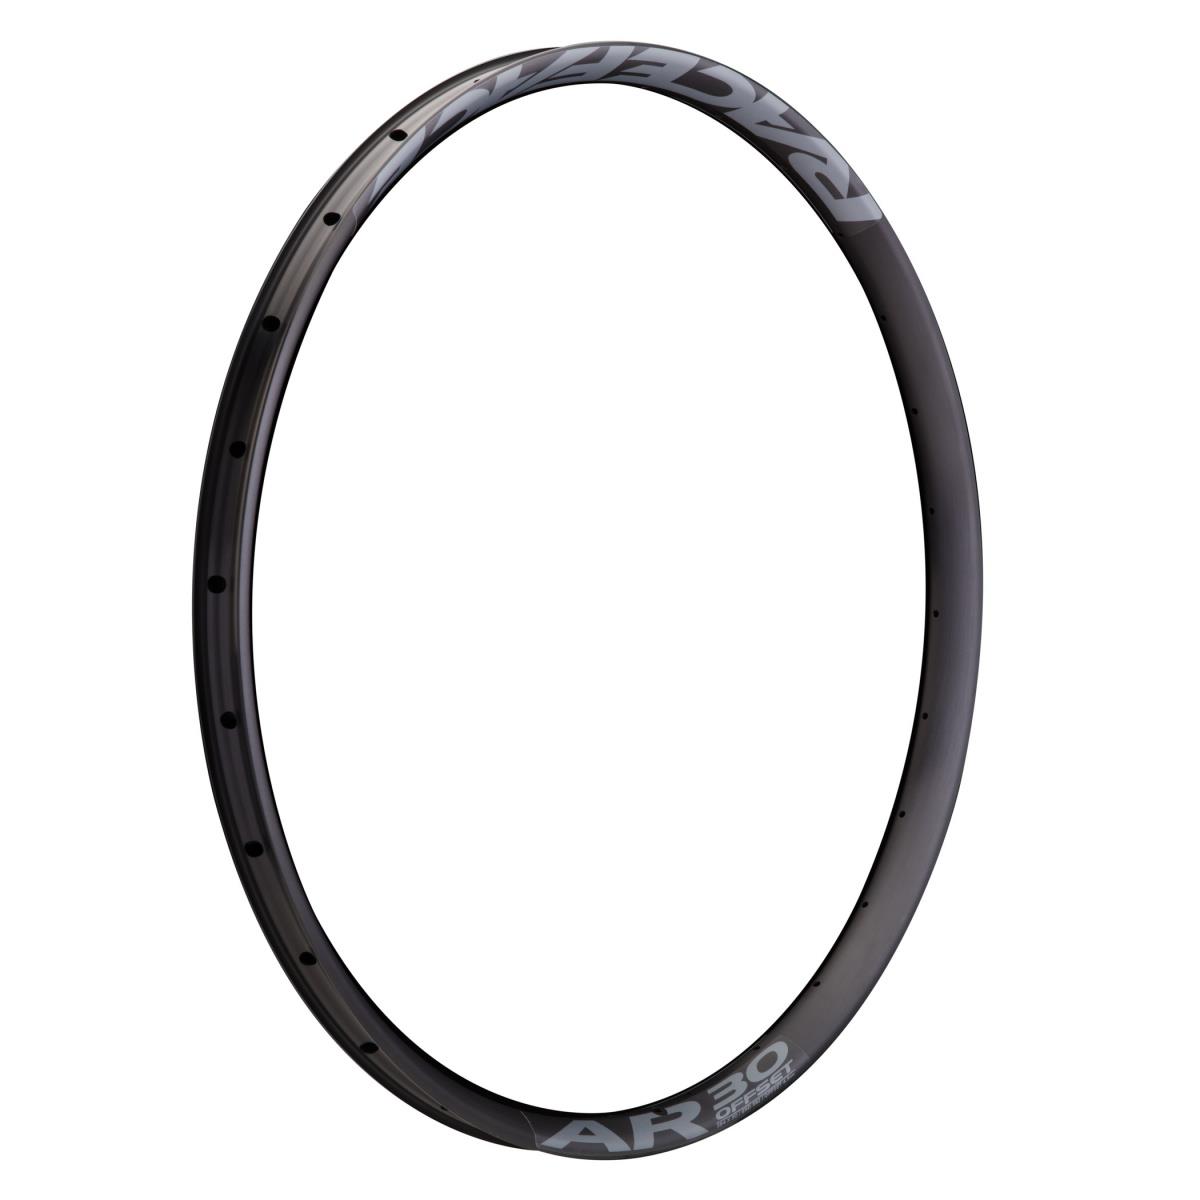 Race Face Jante MTB Ar Offset 30 Black/Grey, 29 Inches x 30 mm